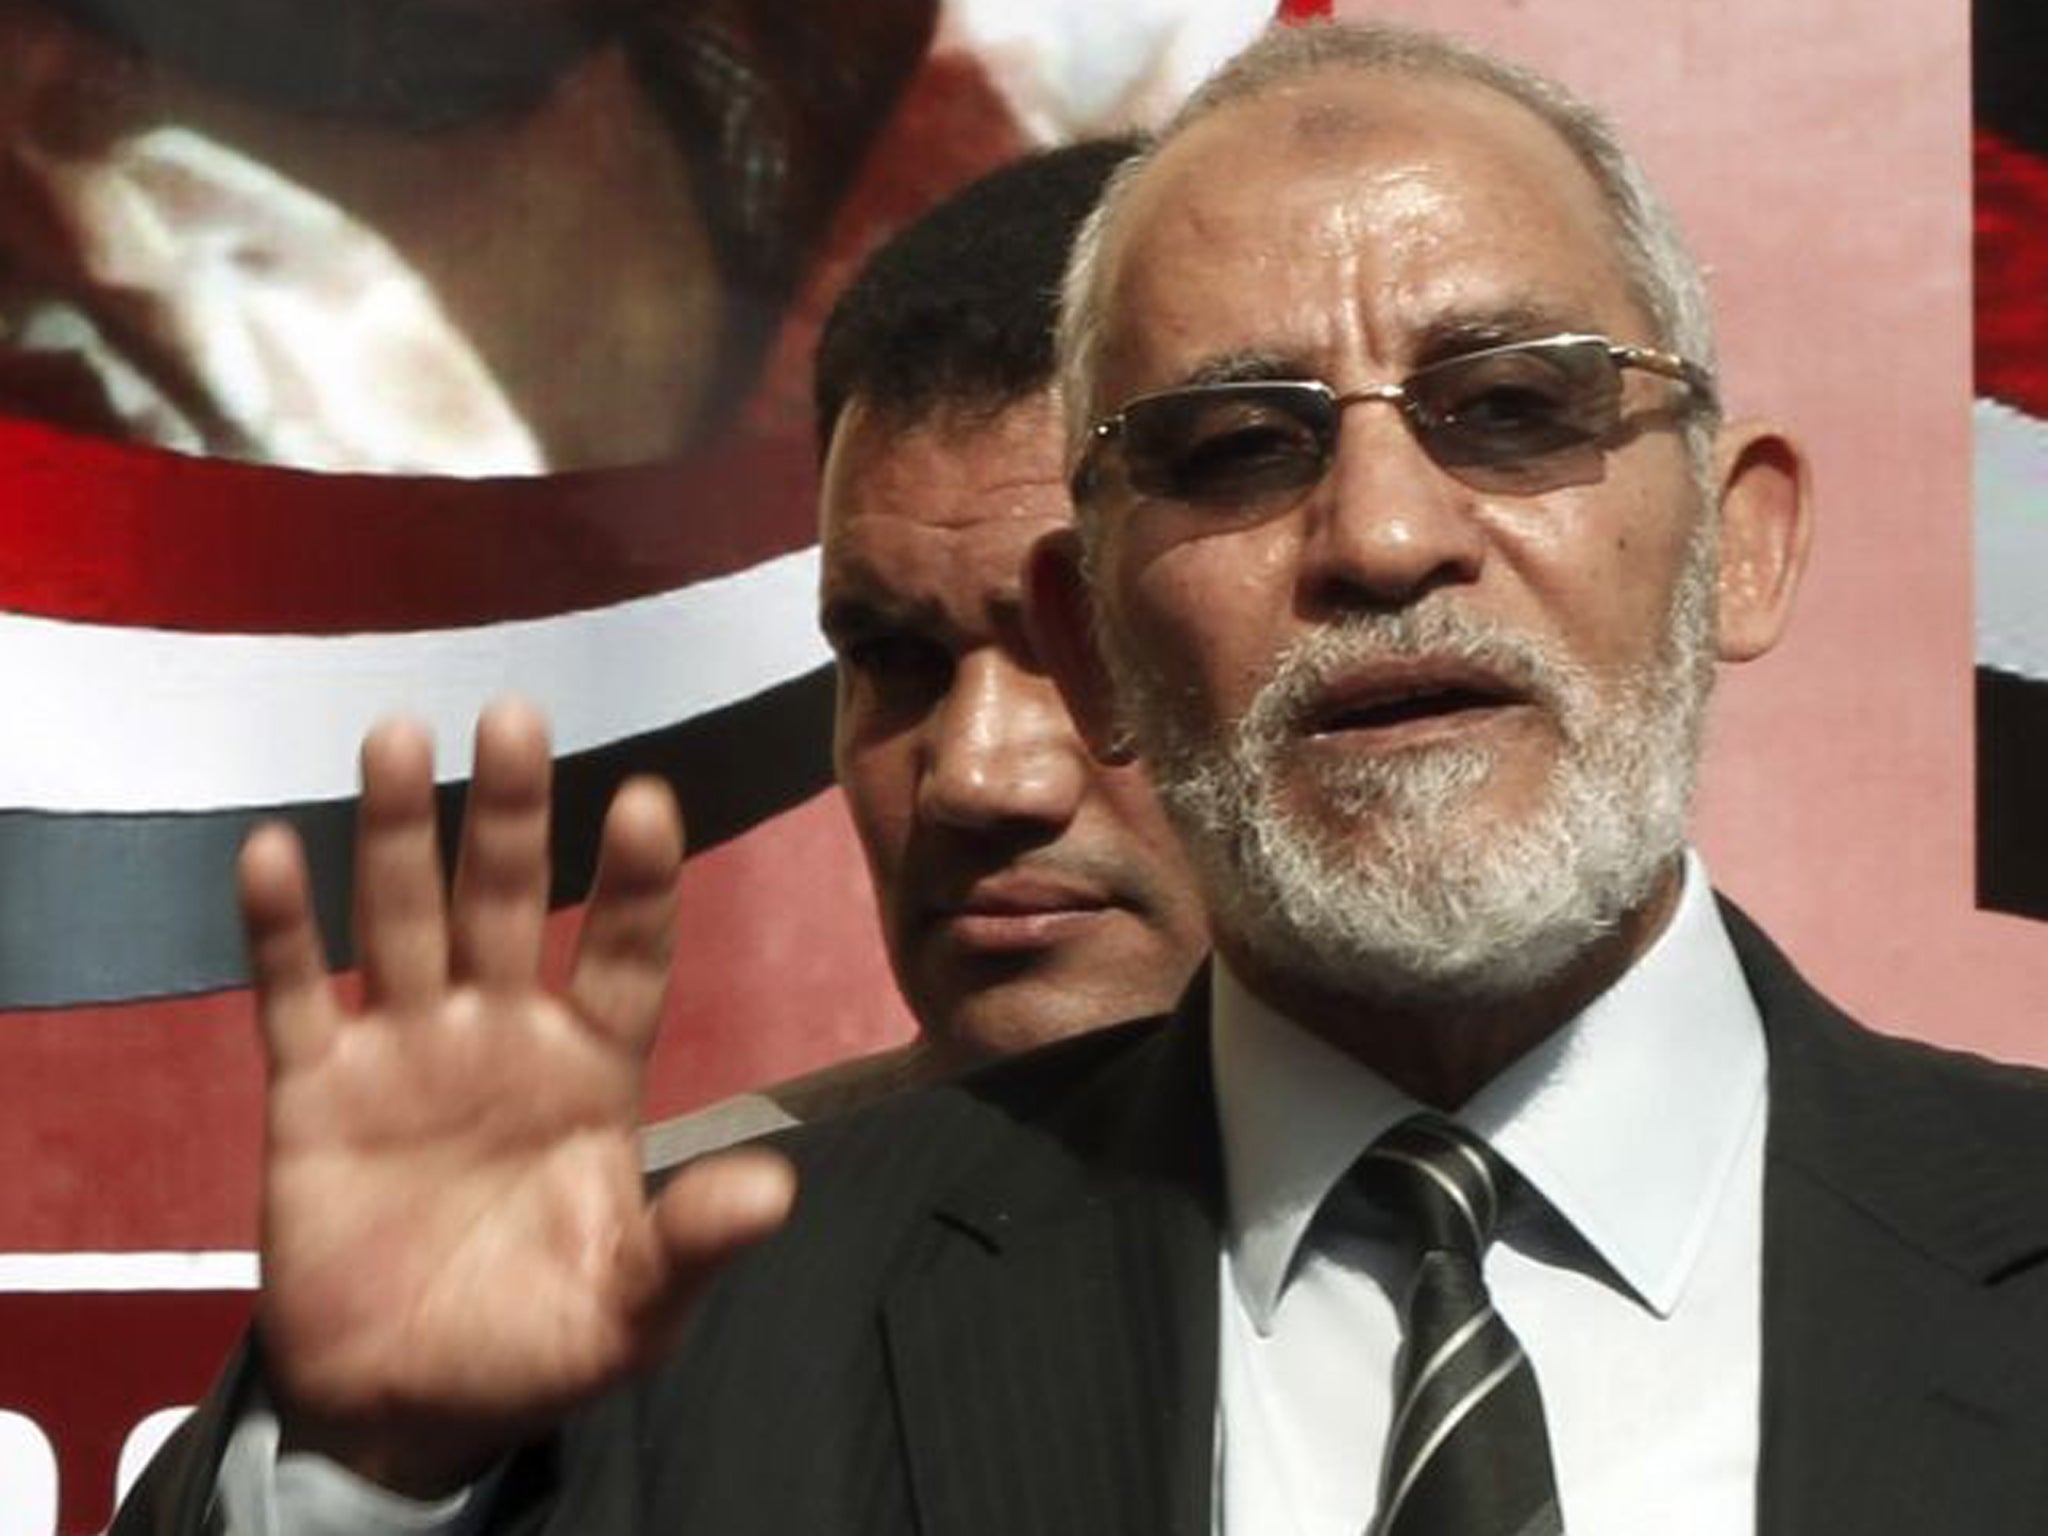 Security officials said Mohamed Badie was captured in a flat in the eastern Cairo district of Nasr City